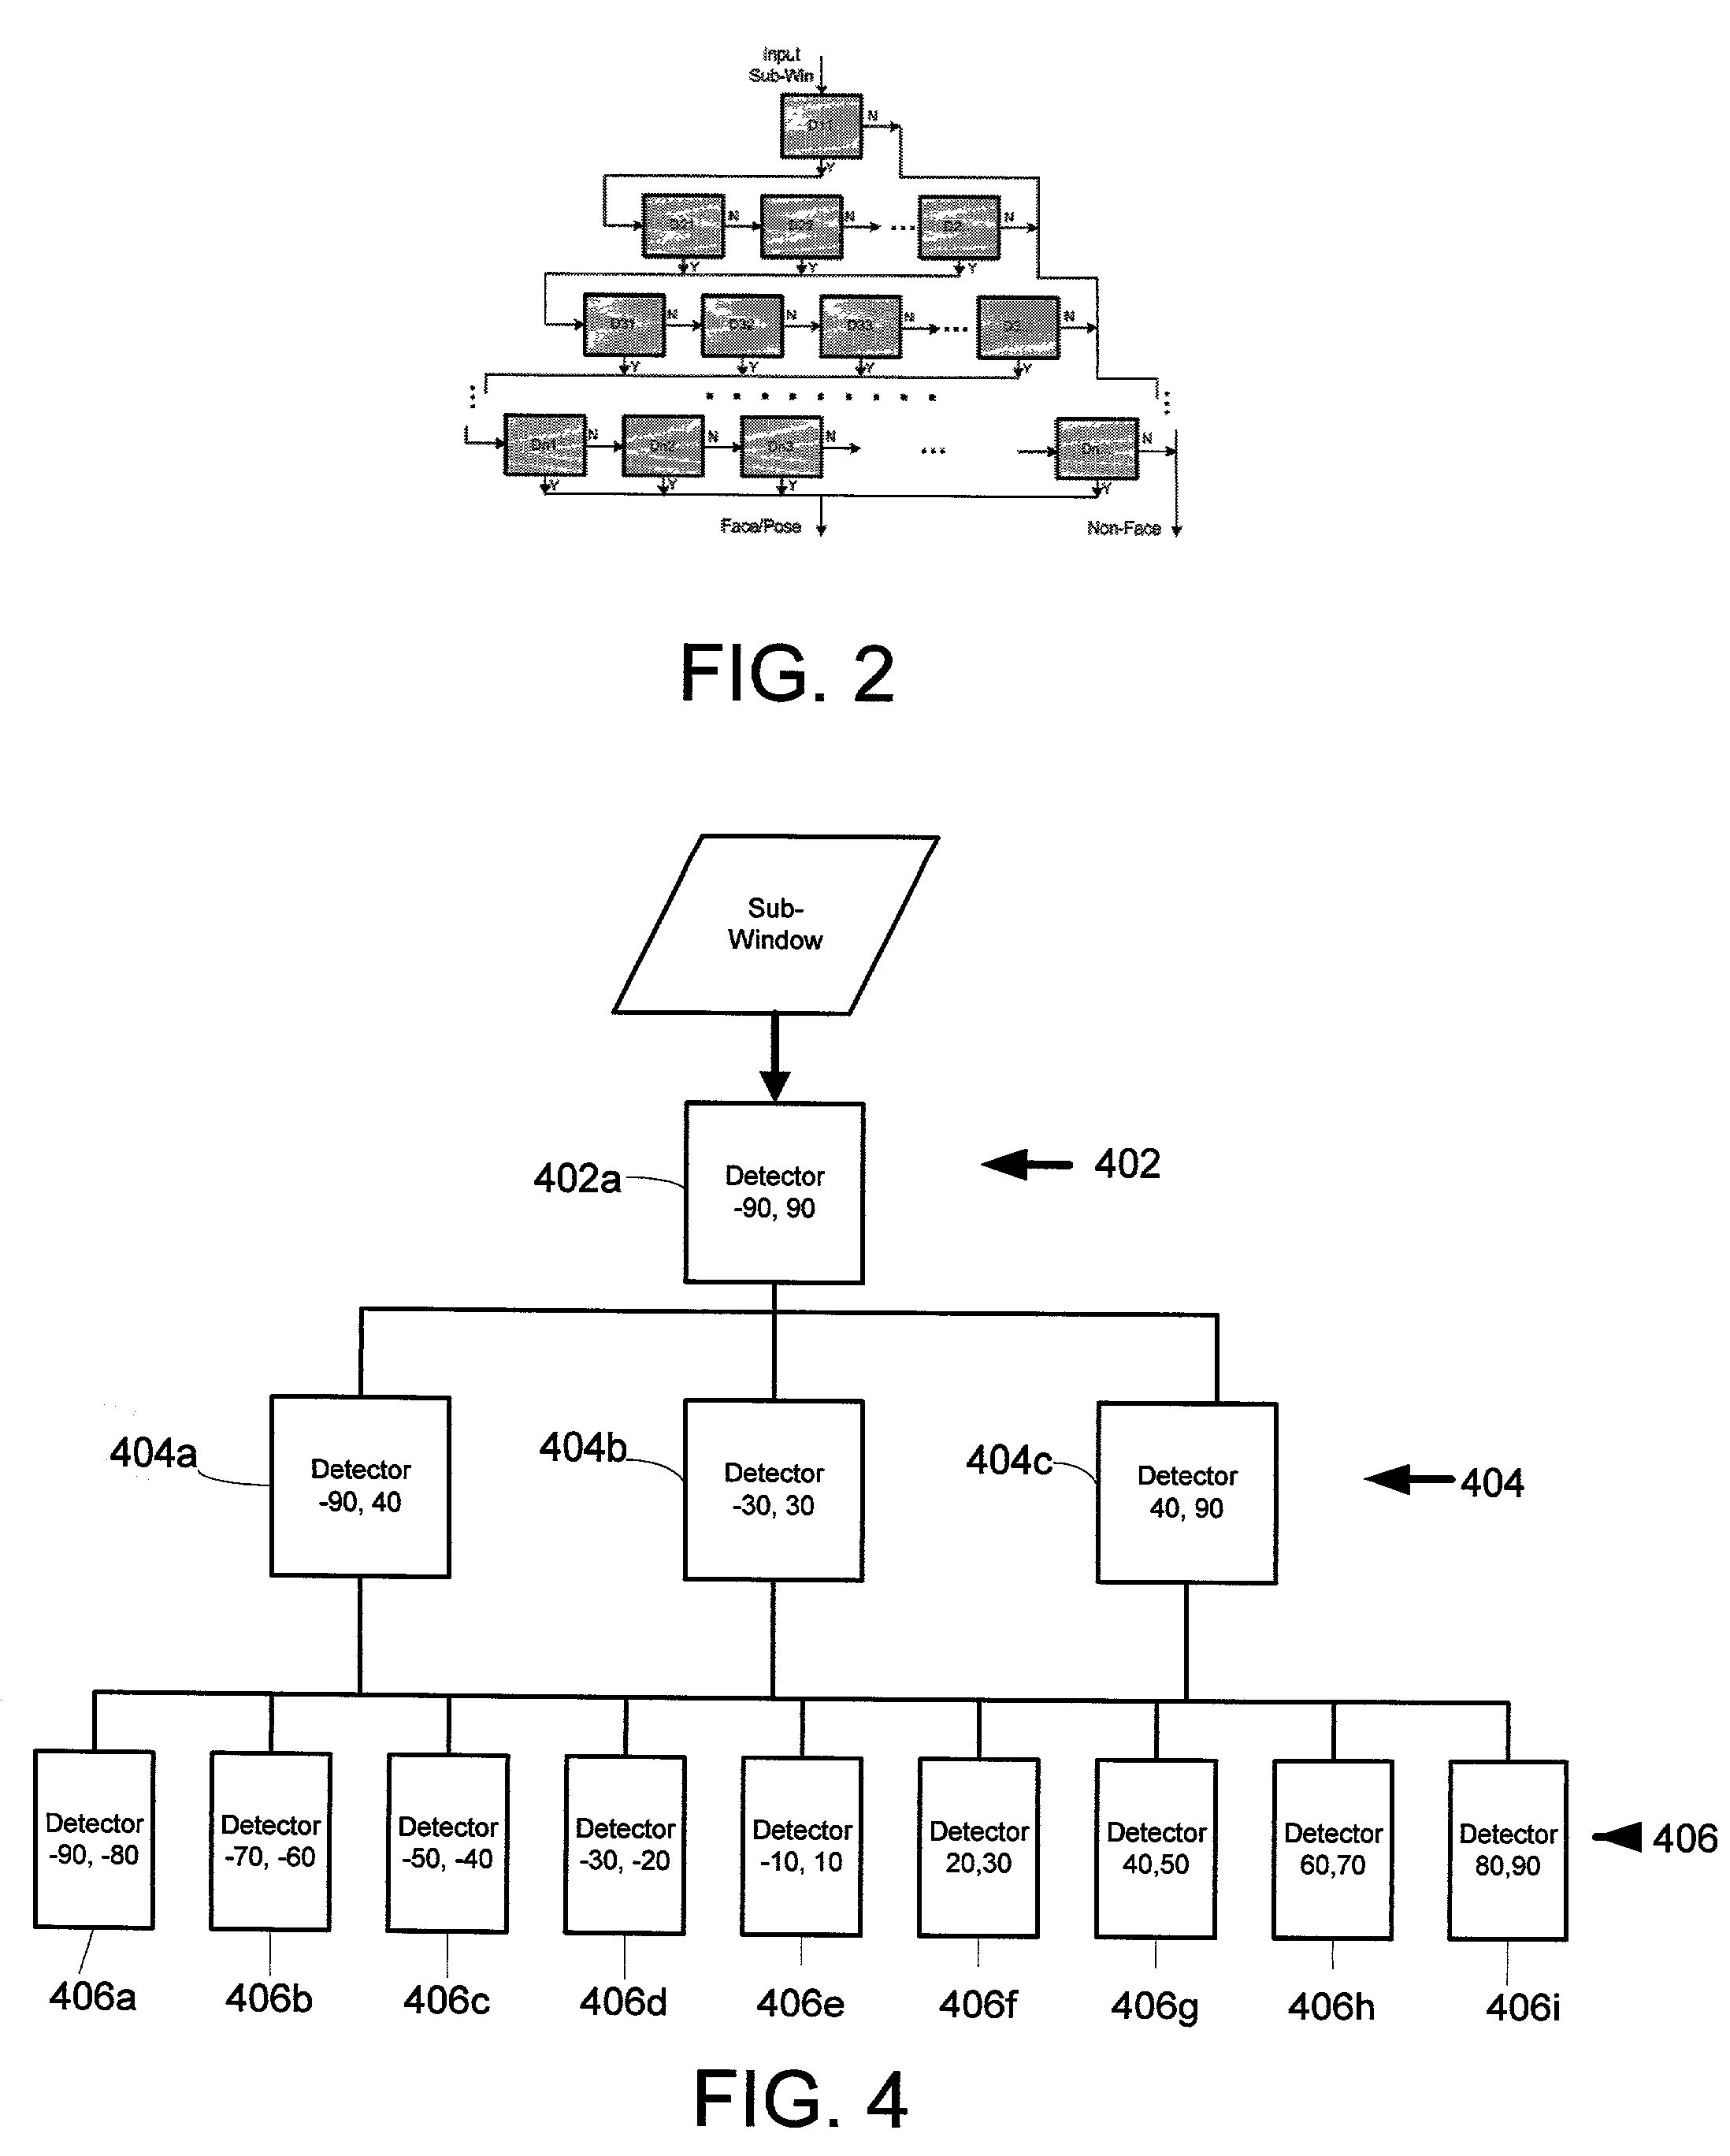 System and method for multi-view face detection